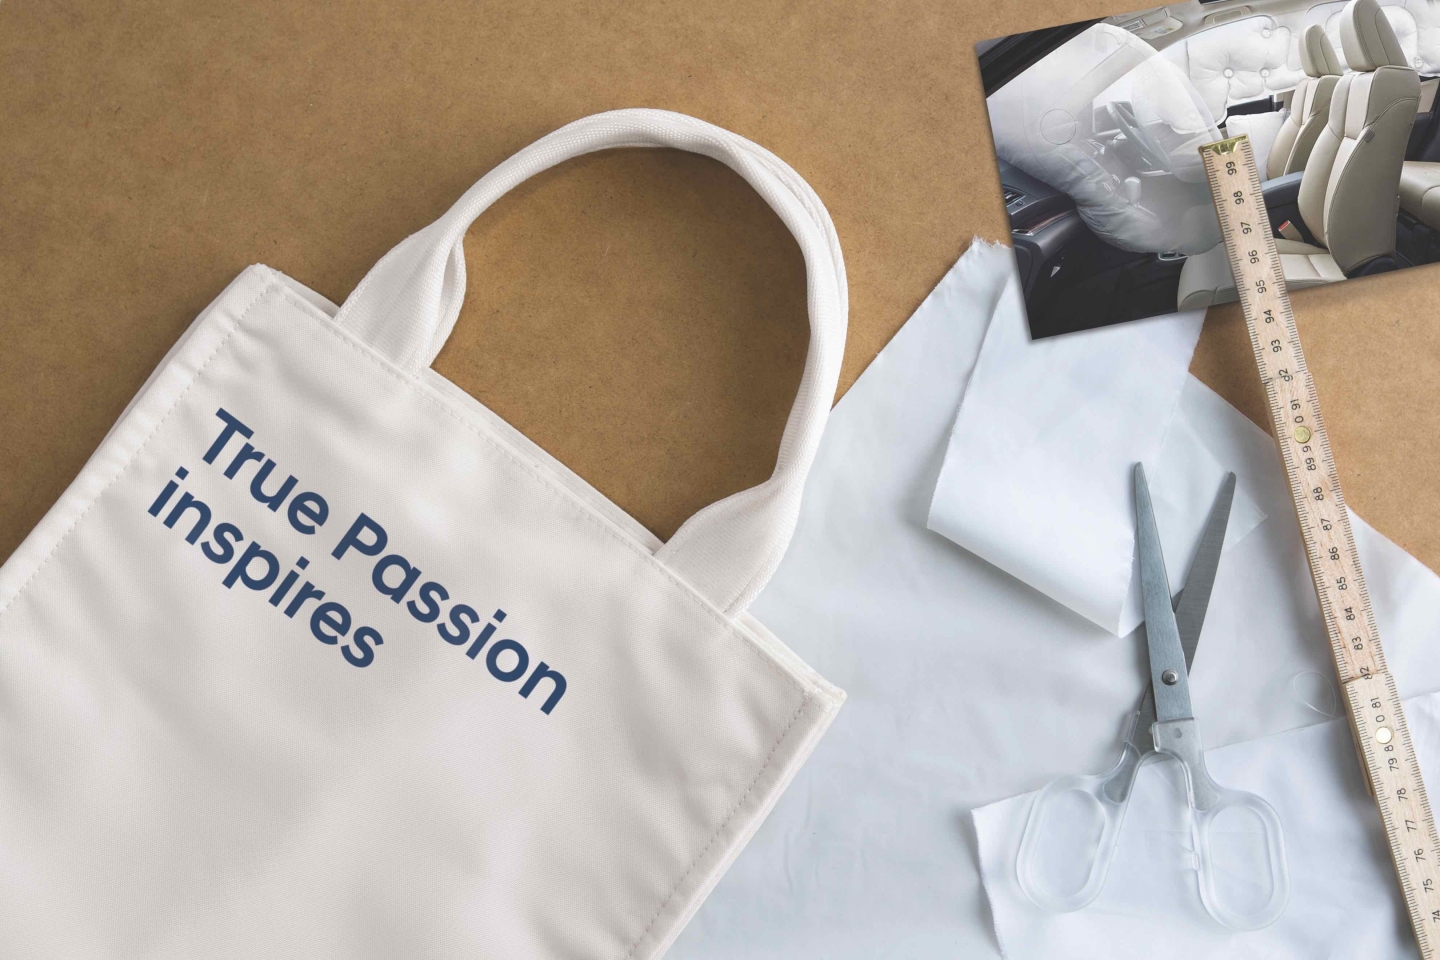 4_FWWC Museum_True Passion eco-bag made w upcycled airbag material_low res